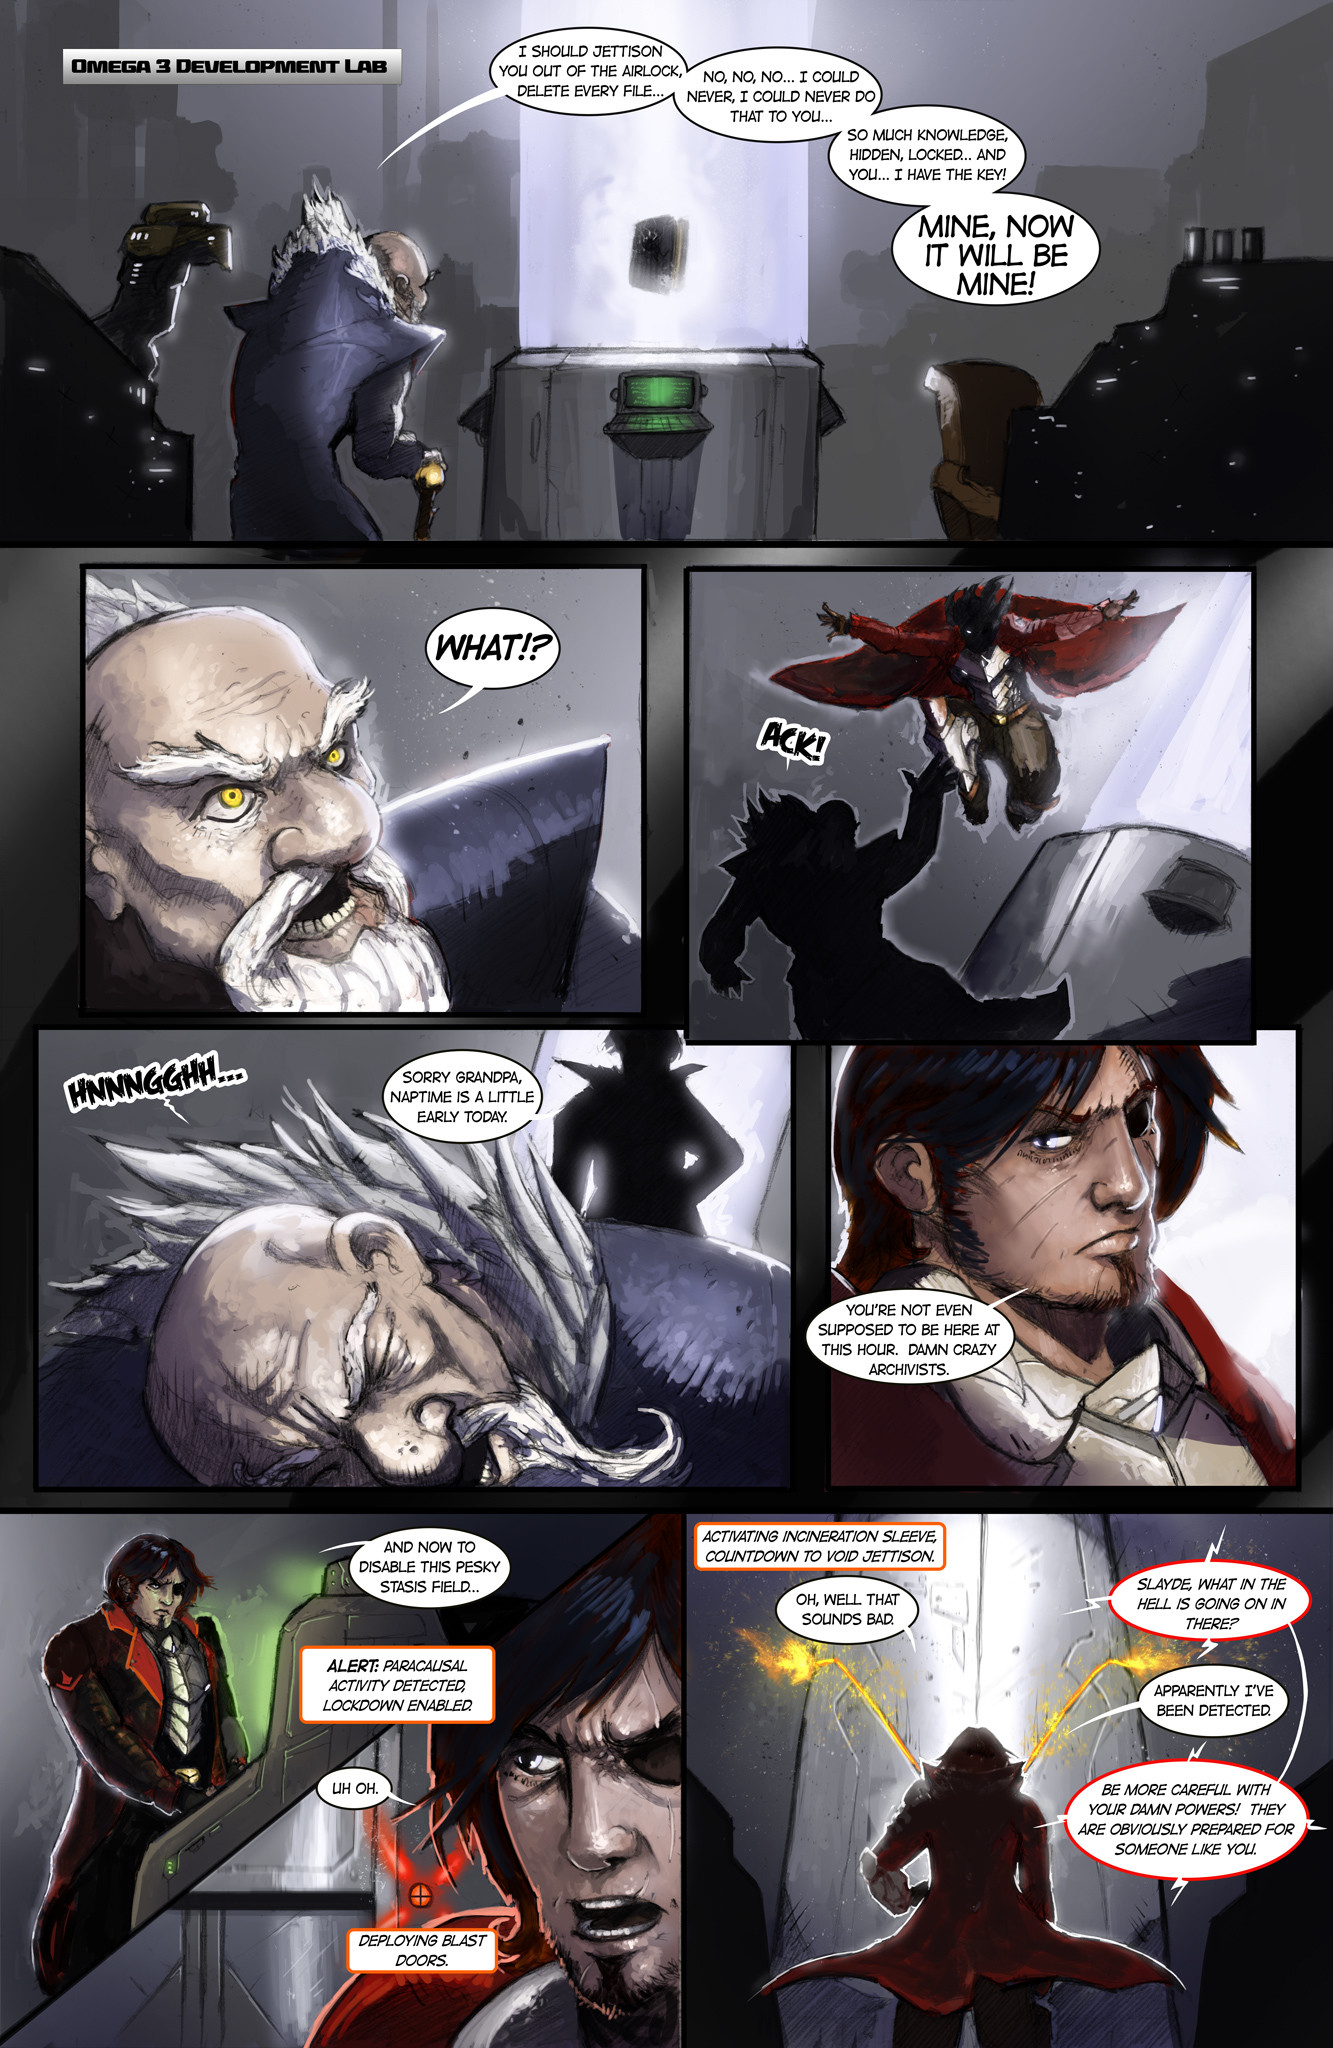 michael-rookard-chapter1-page2.jpg